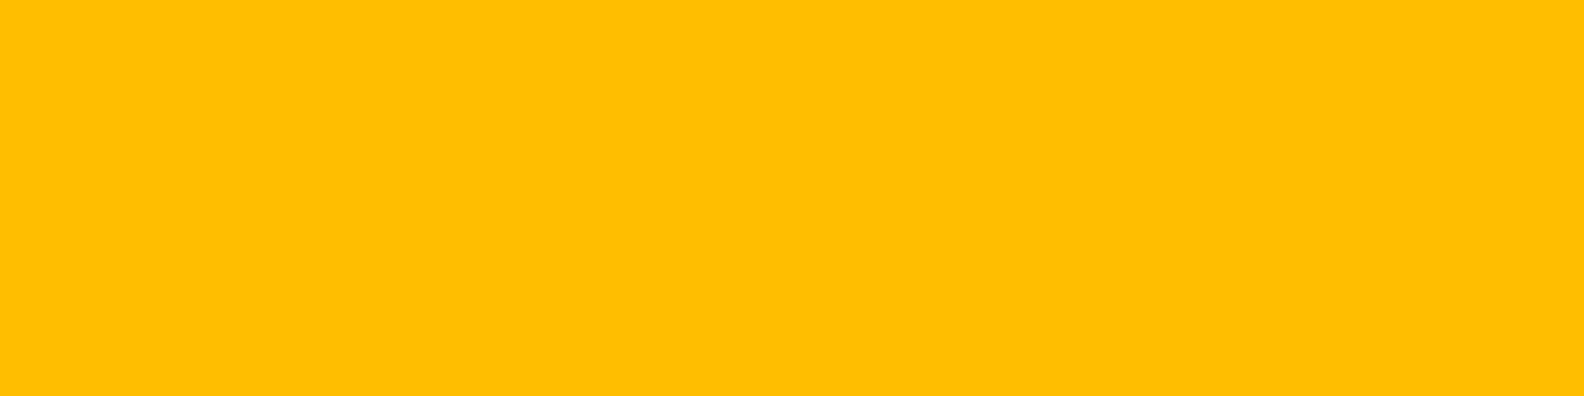 1584x396 Amber Solid Color Background